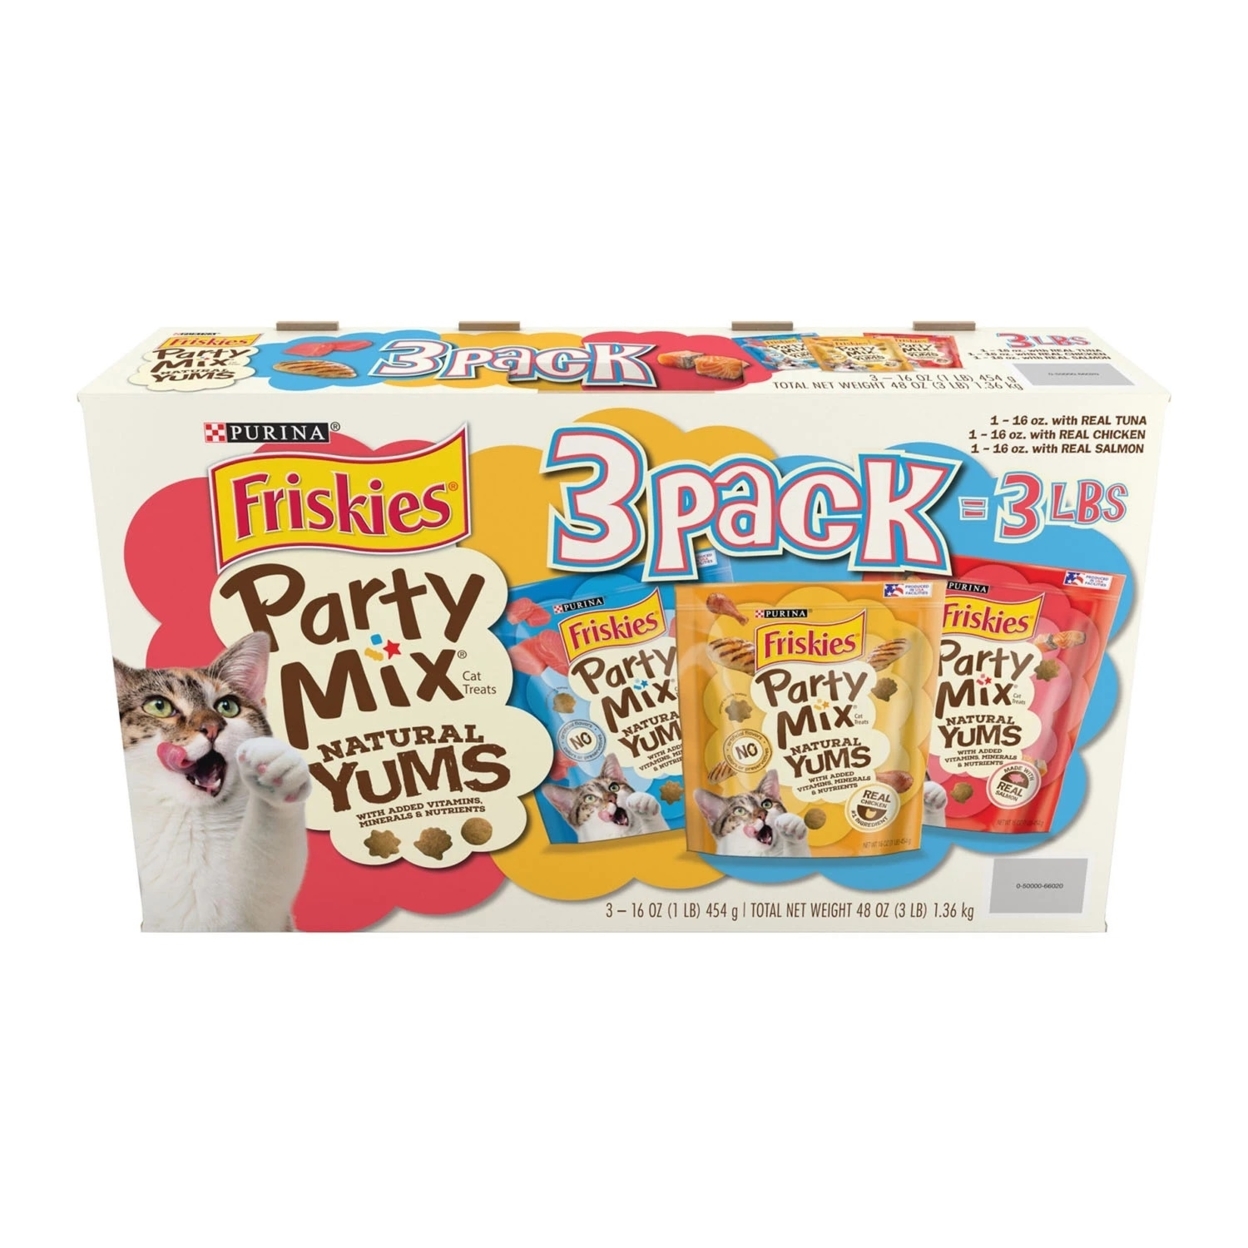 Purina Friskies Party Mix Natural Yums Cat Treats With Real Meat (48 Ounce)